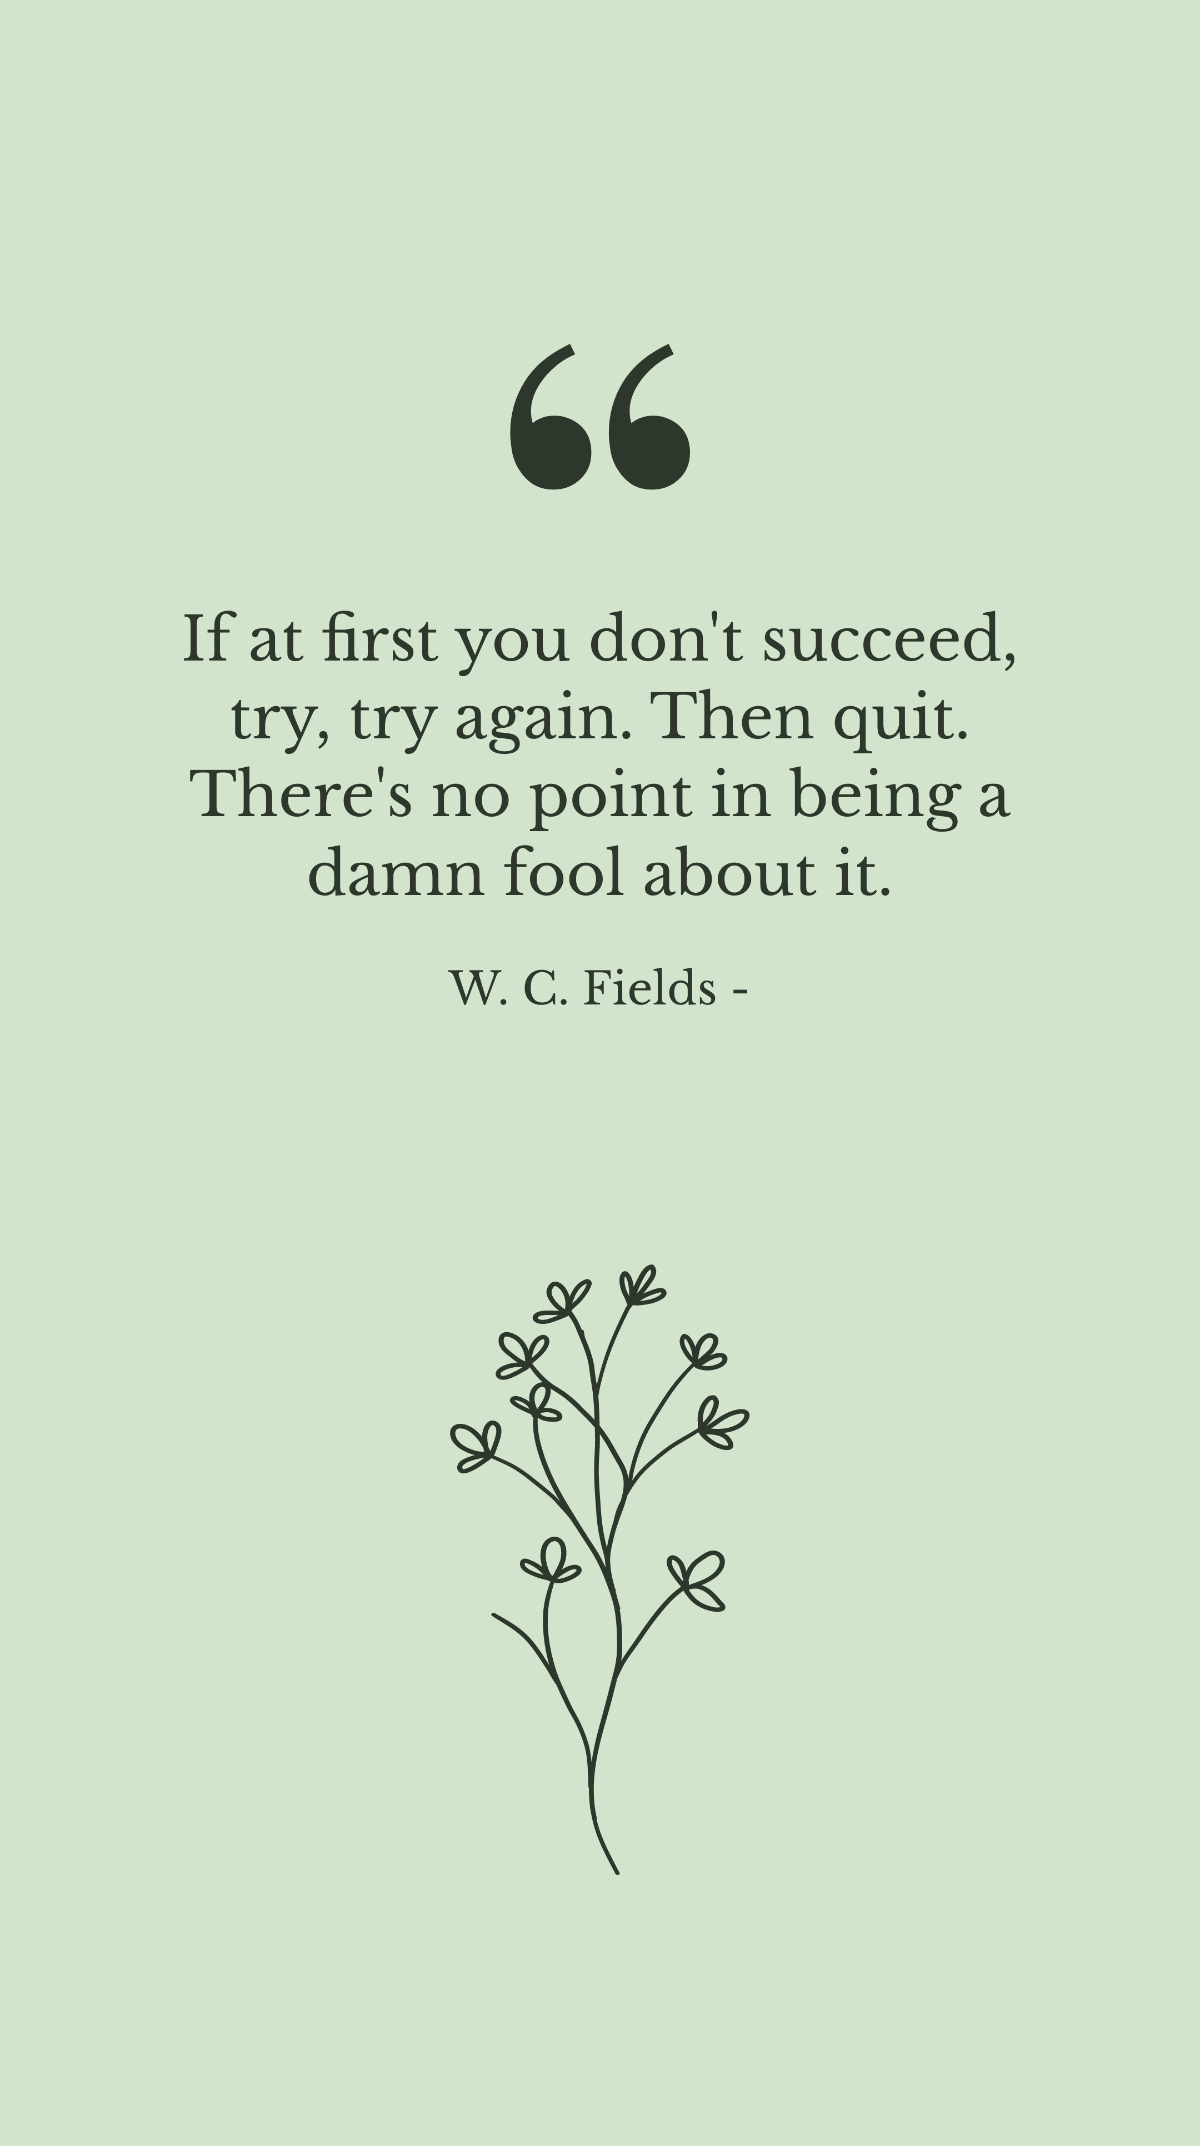 Free W. C. Fields - If at first you don't succeed, try, try again. Then quit. There's no point in being a damn fool about it. Template